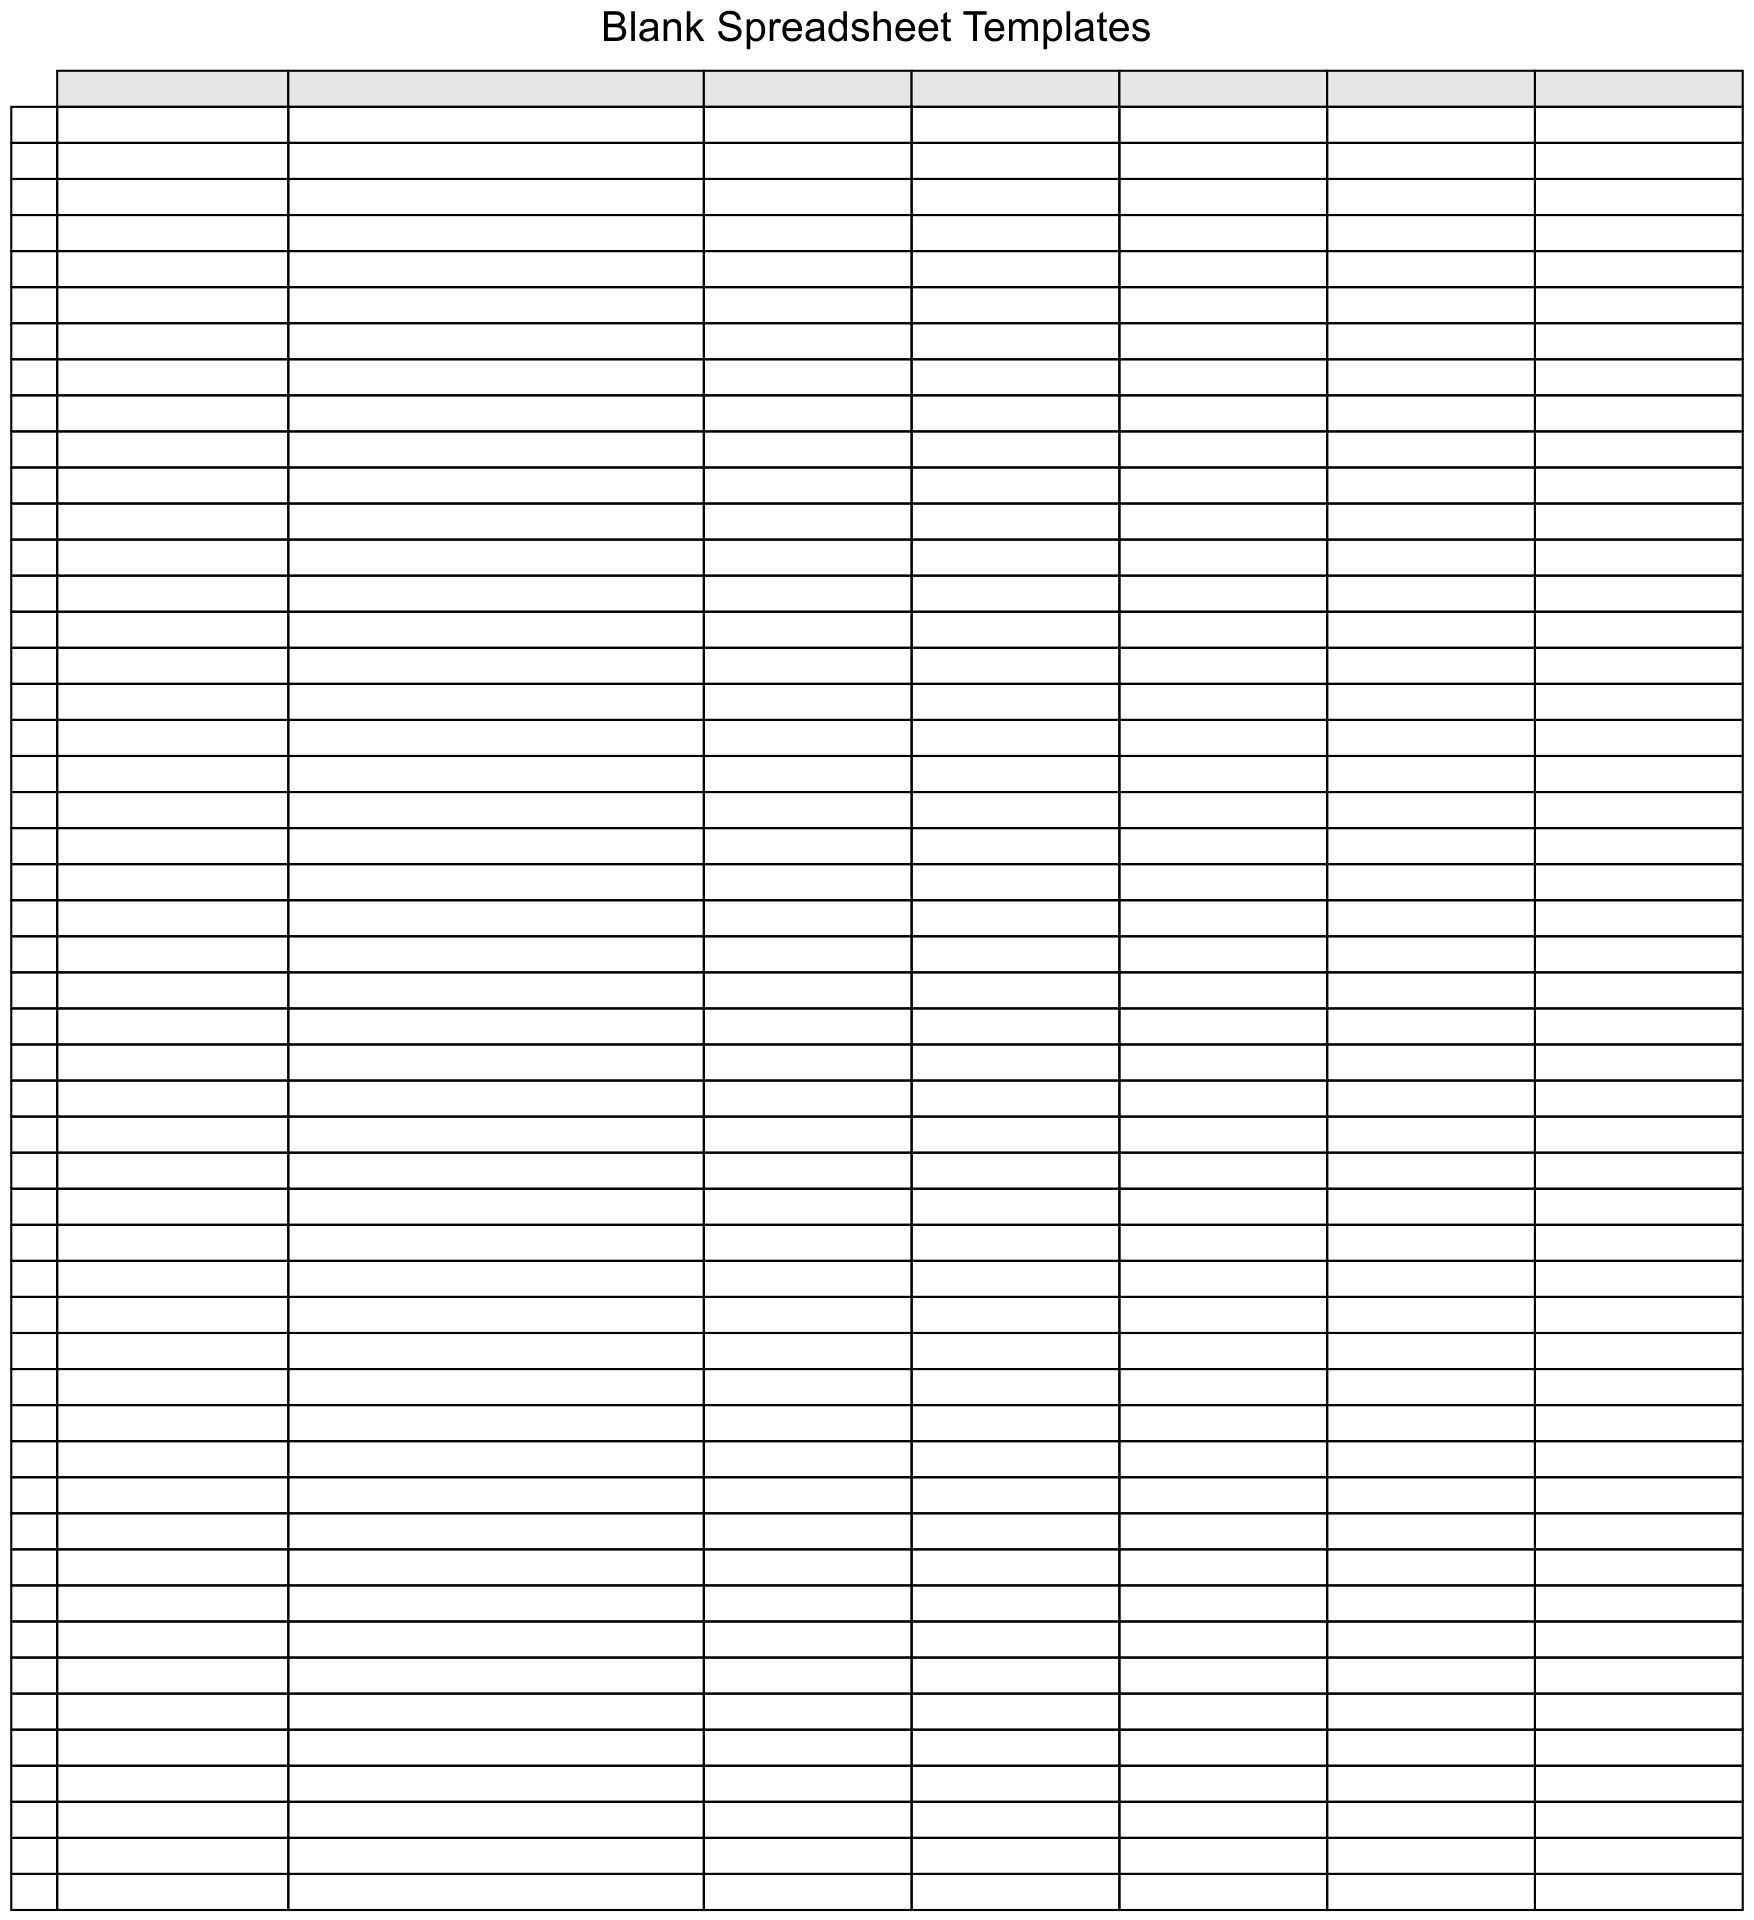 Free Printable Blank Template Of Us States Spreadsheet